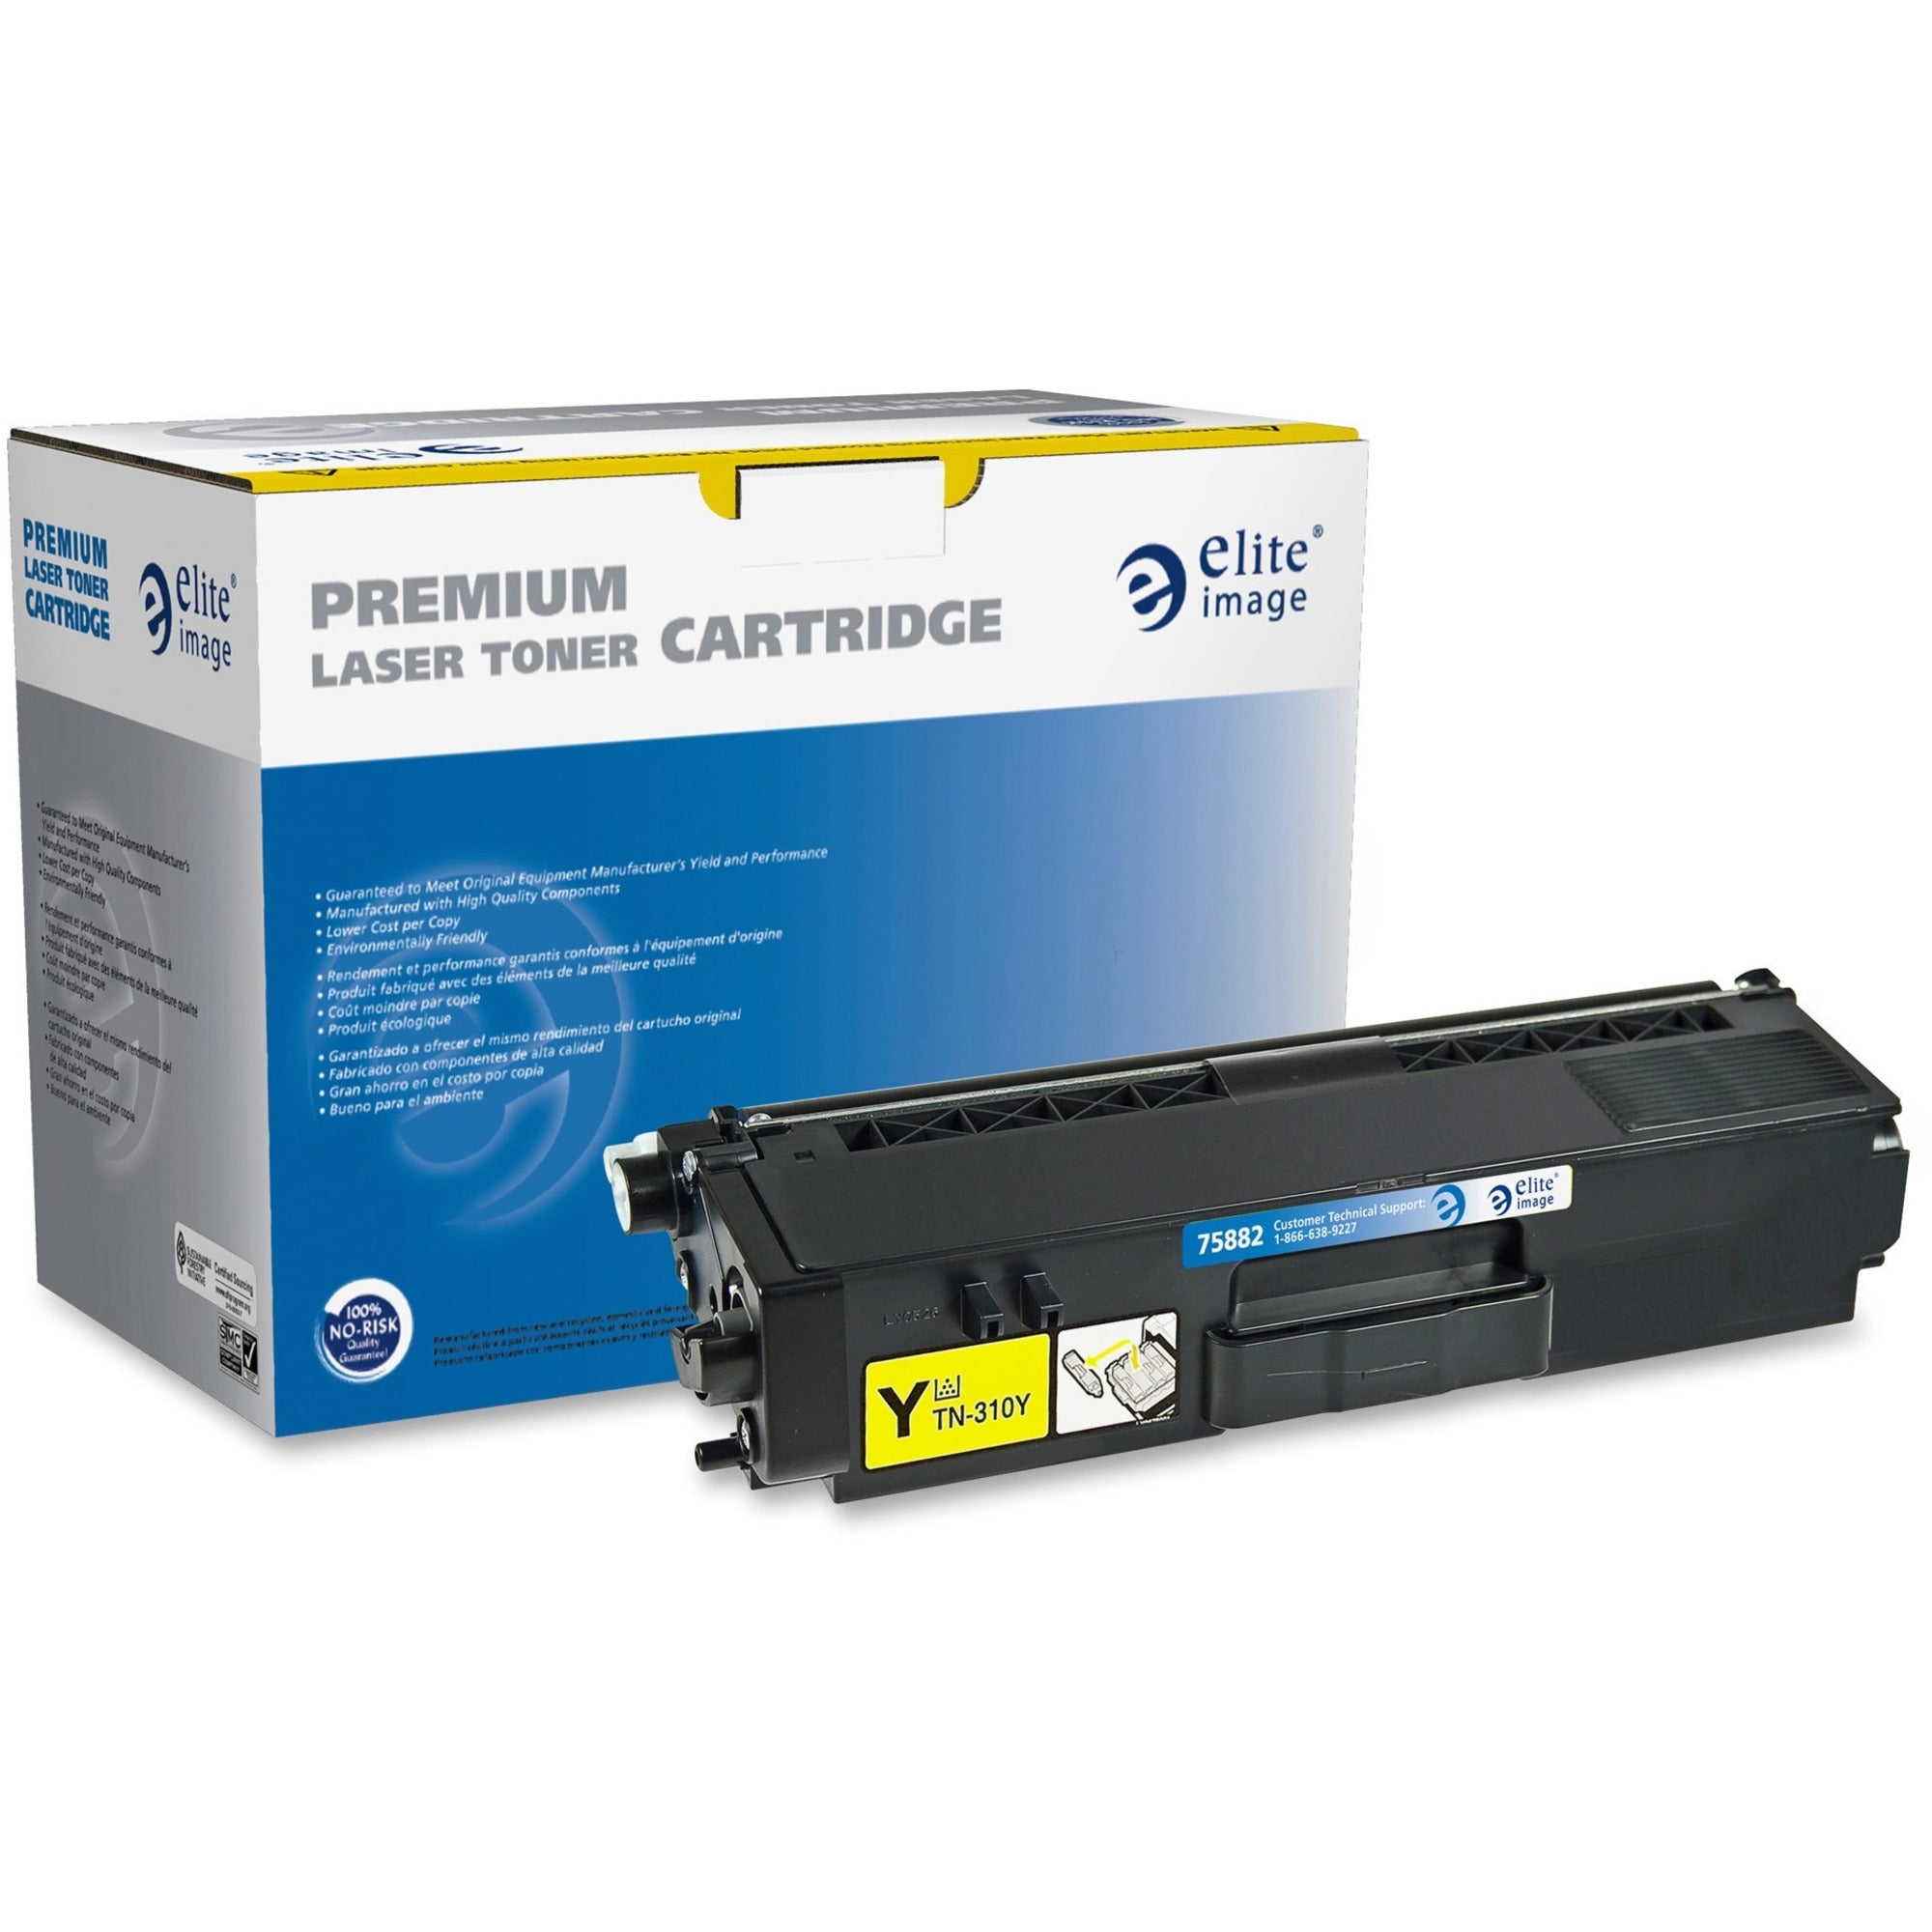 Elite Image Remanufactured Toner Cartridge - Alternative for Brother (TN310) - Laser -1500 - Yellow - 1 Each - 1